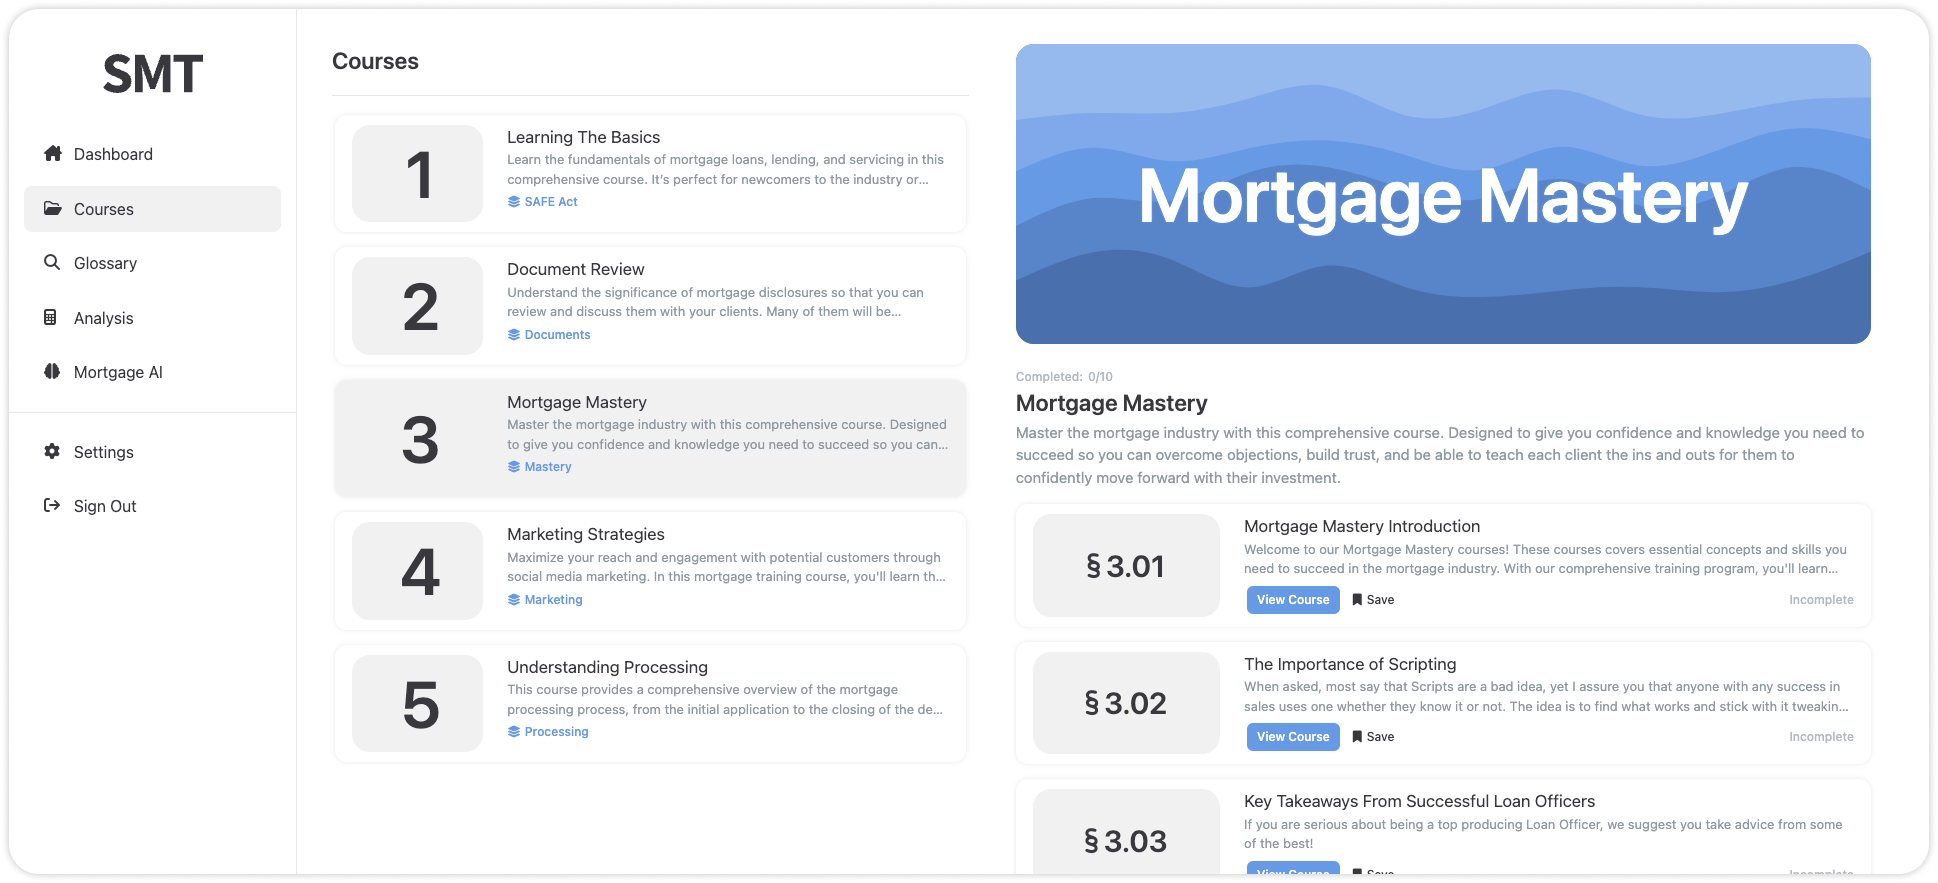 Overview of Smart Mortgage Training courses